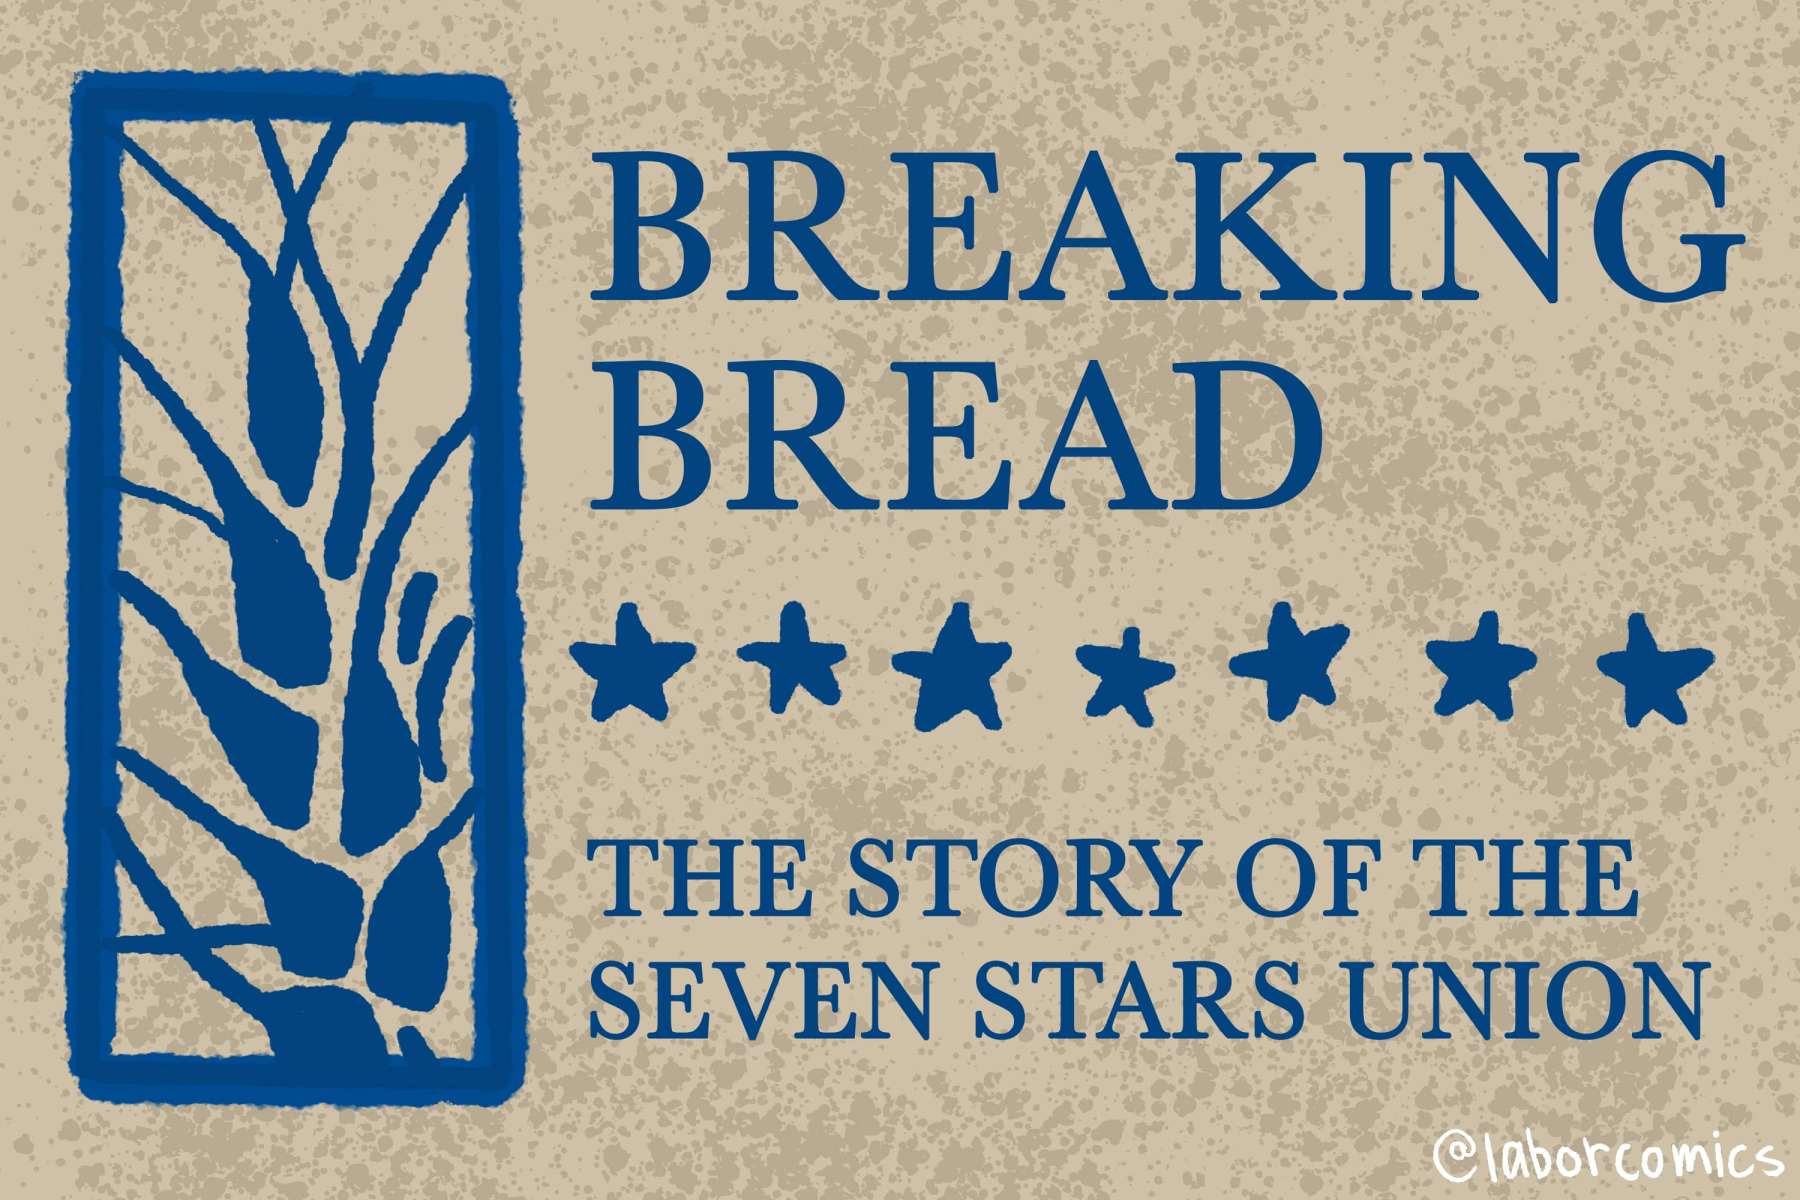 Rhode Island News: Breaking Bread: The Story of the Seven Stars Union